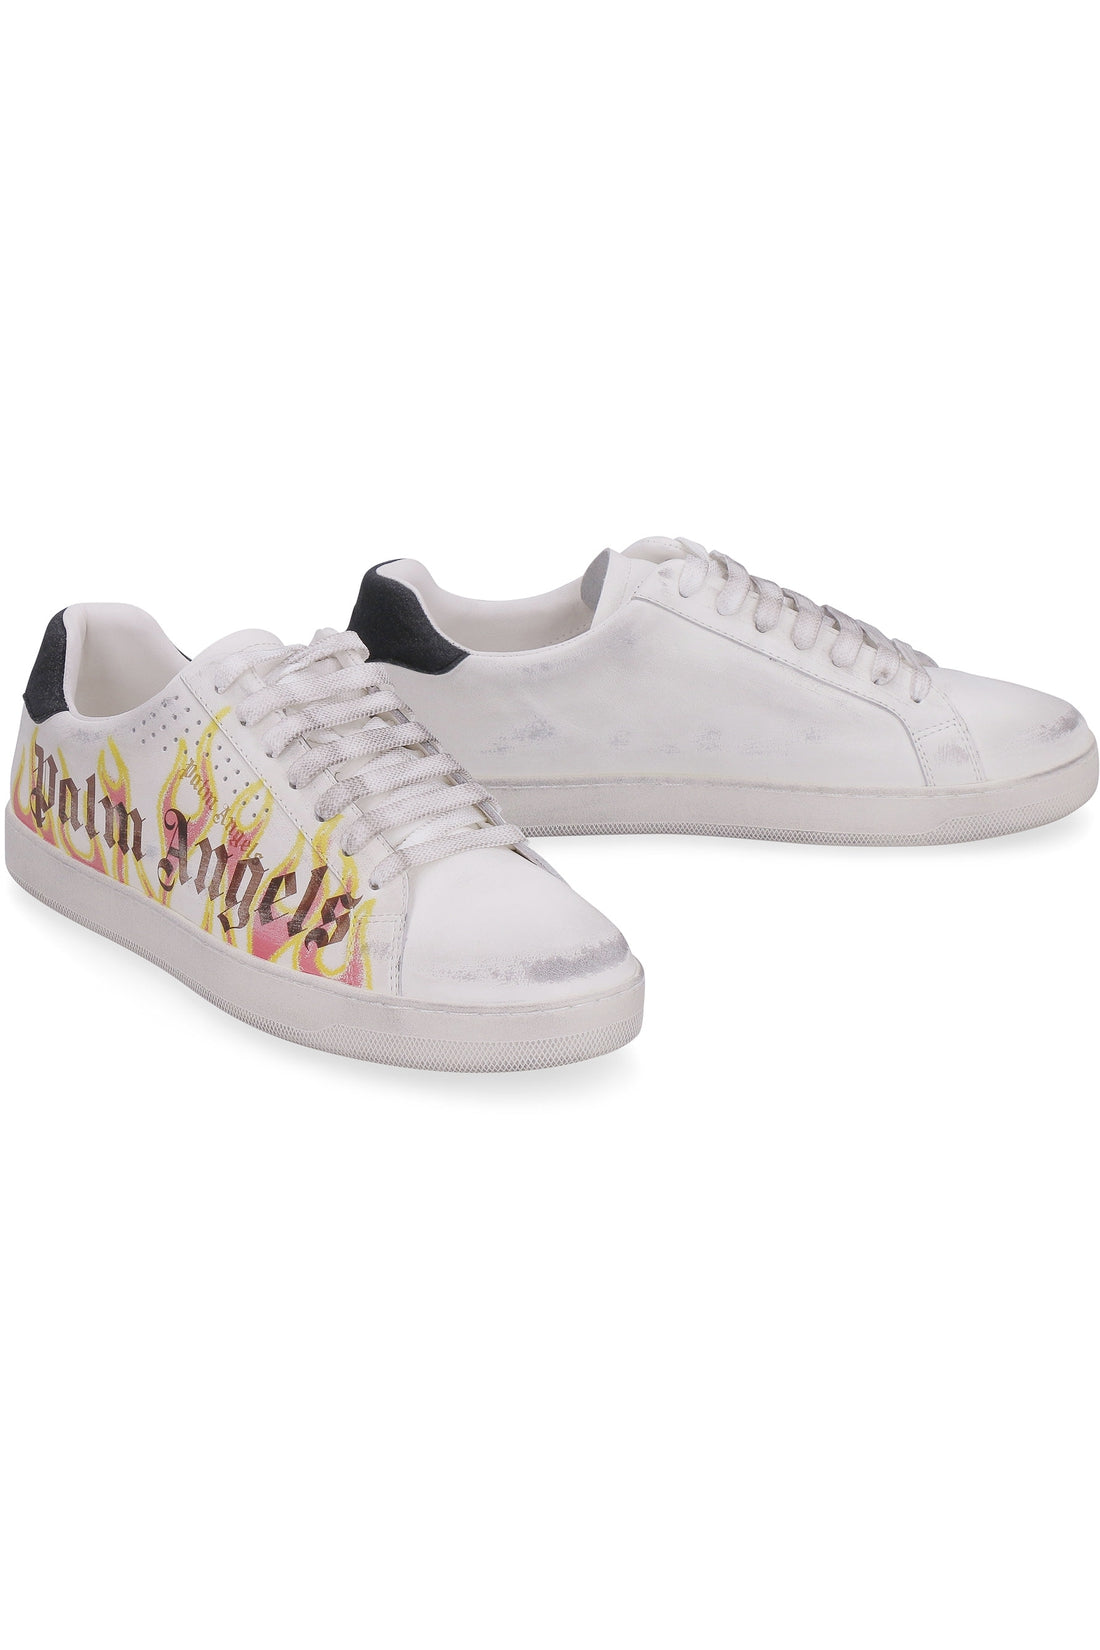 Palm Angels-OUTLET-SALE-Palm One low-top sneakers-ARCHIVIST